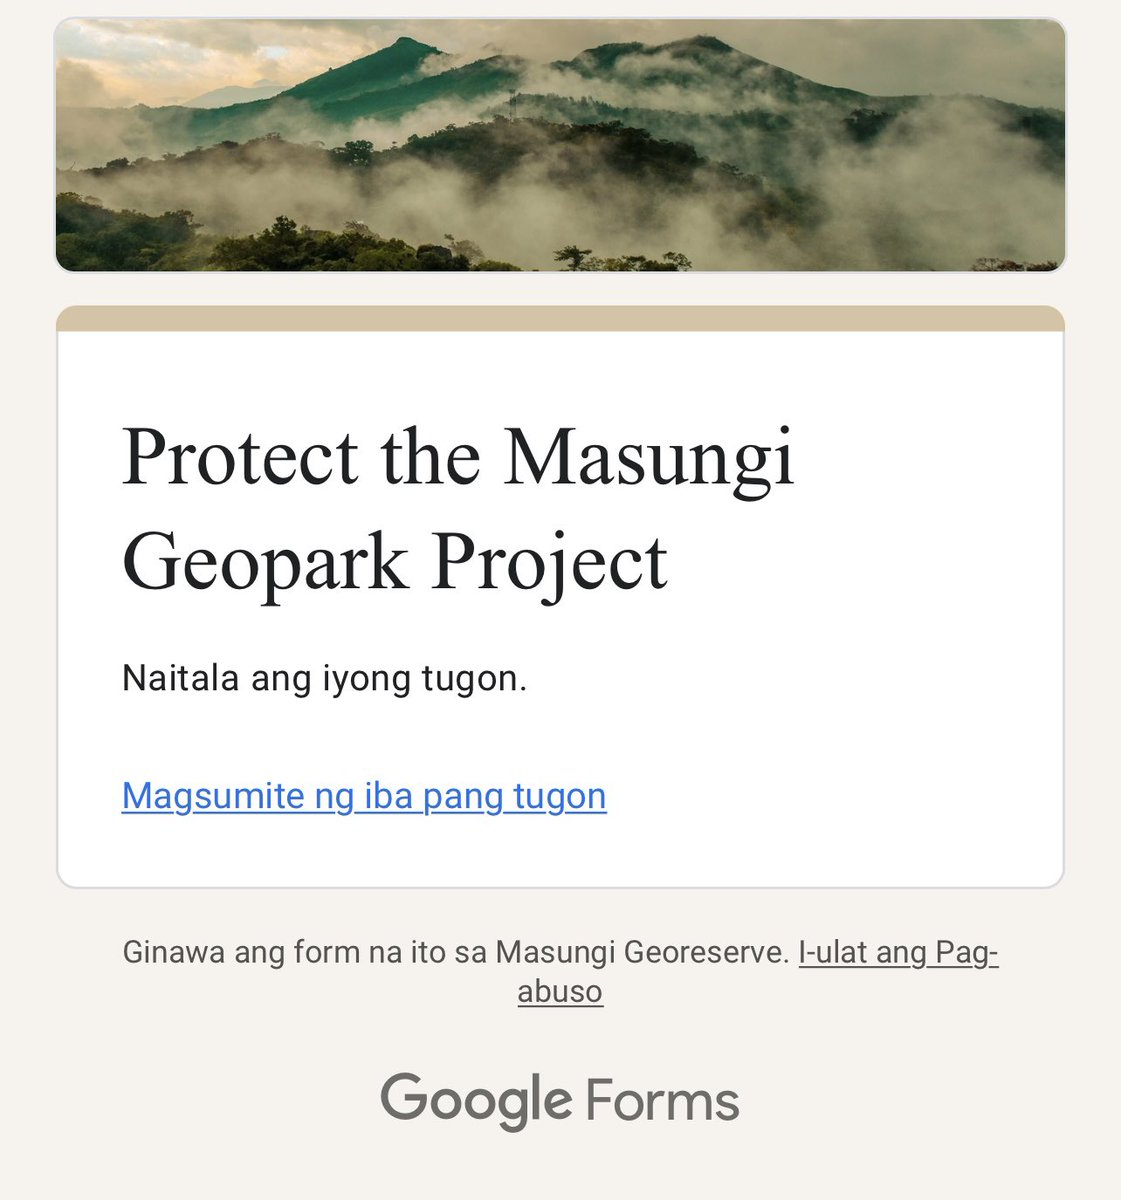 Please sign the petition to support the project: bit.ly/protectmasungi

#SaveMasungi